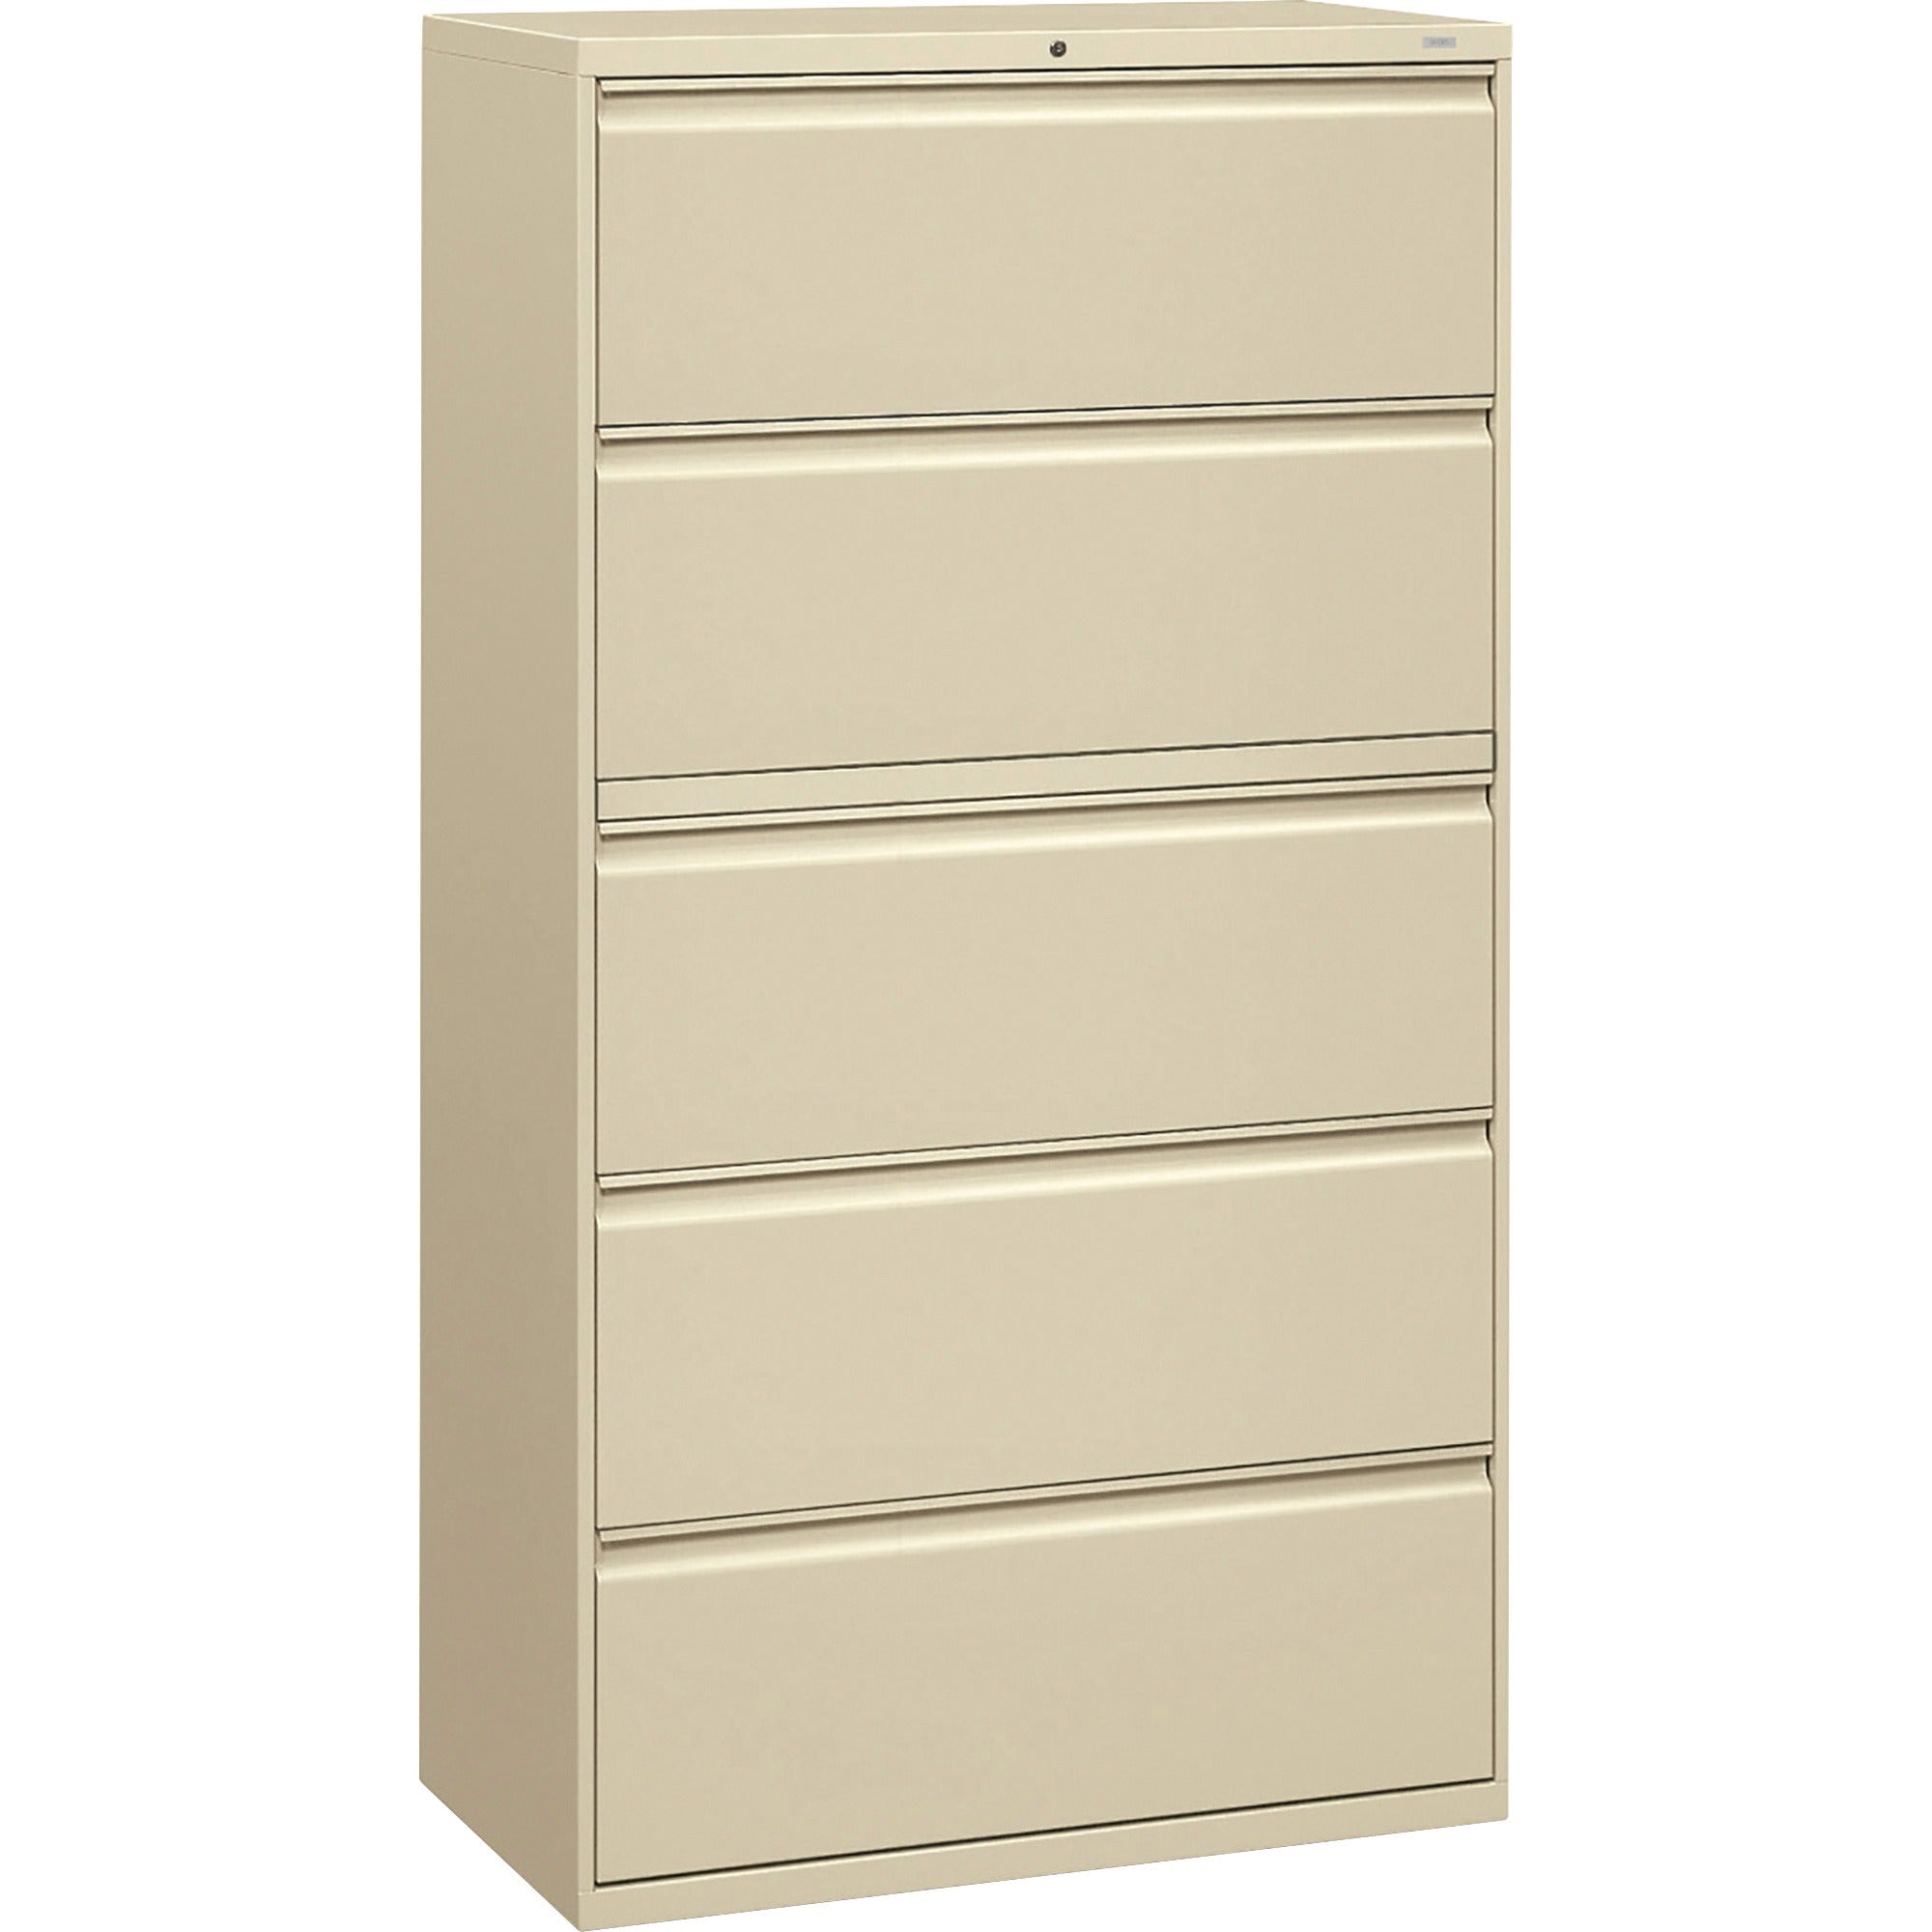 HON Brigade 800 H885 Lateral File - 36" x 18"67" - 5 Drawer(s) - Finish: Putty - 